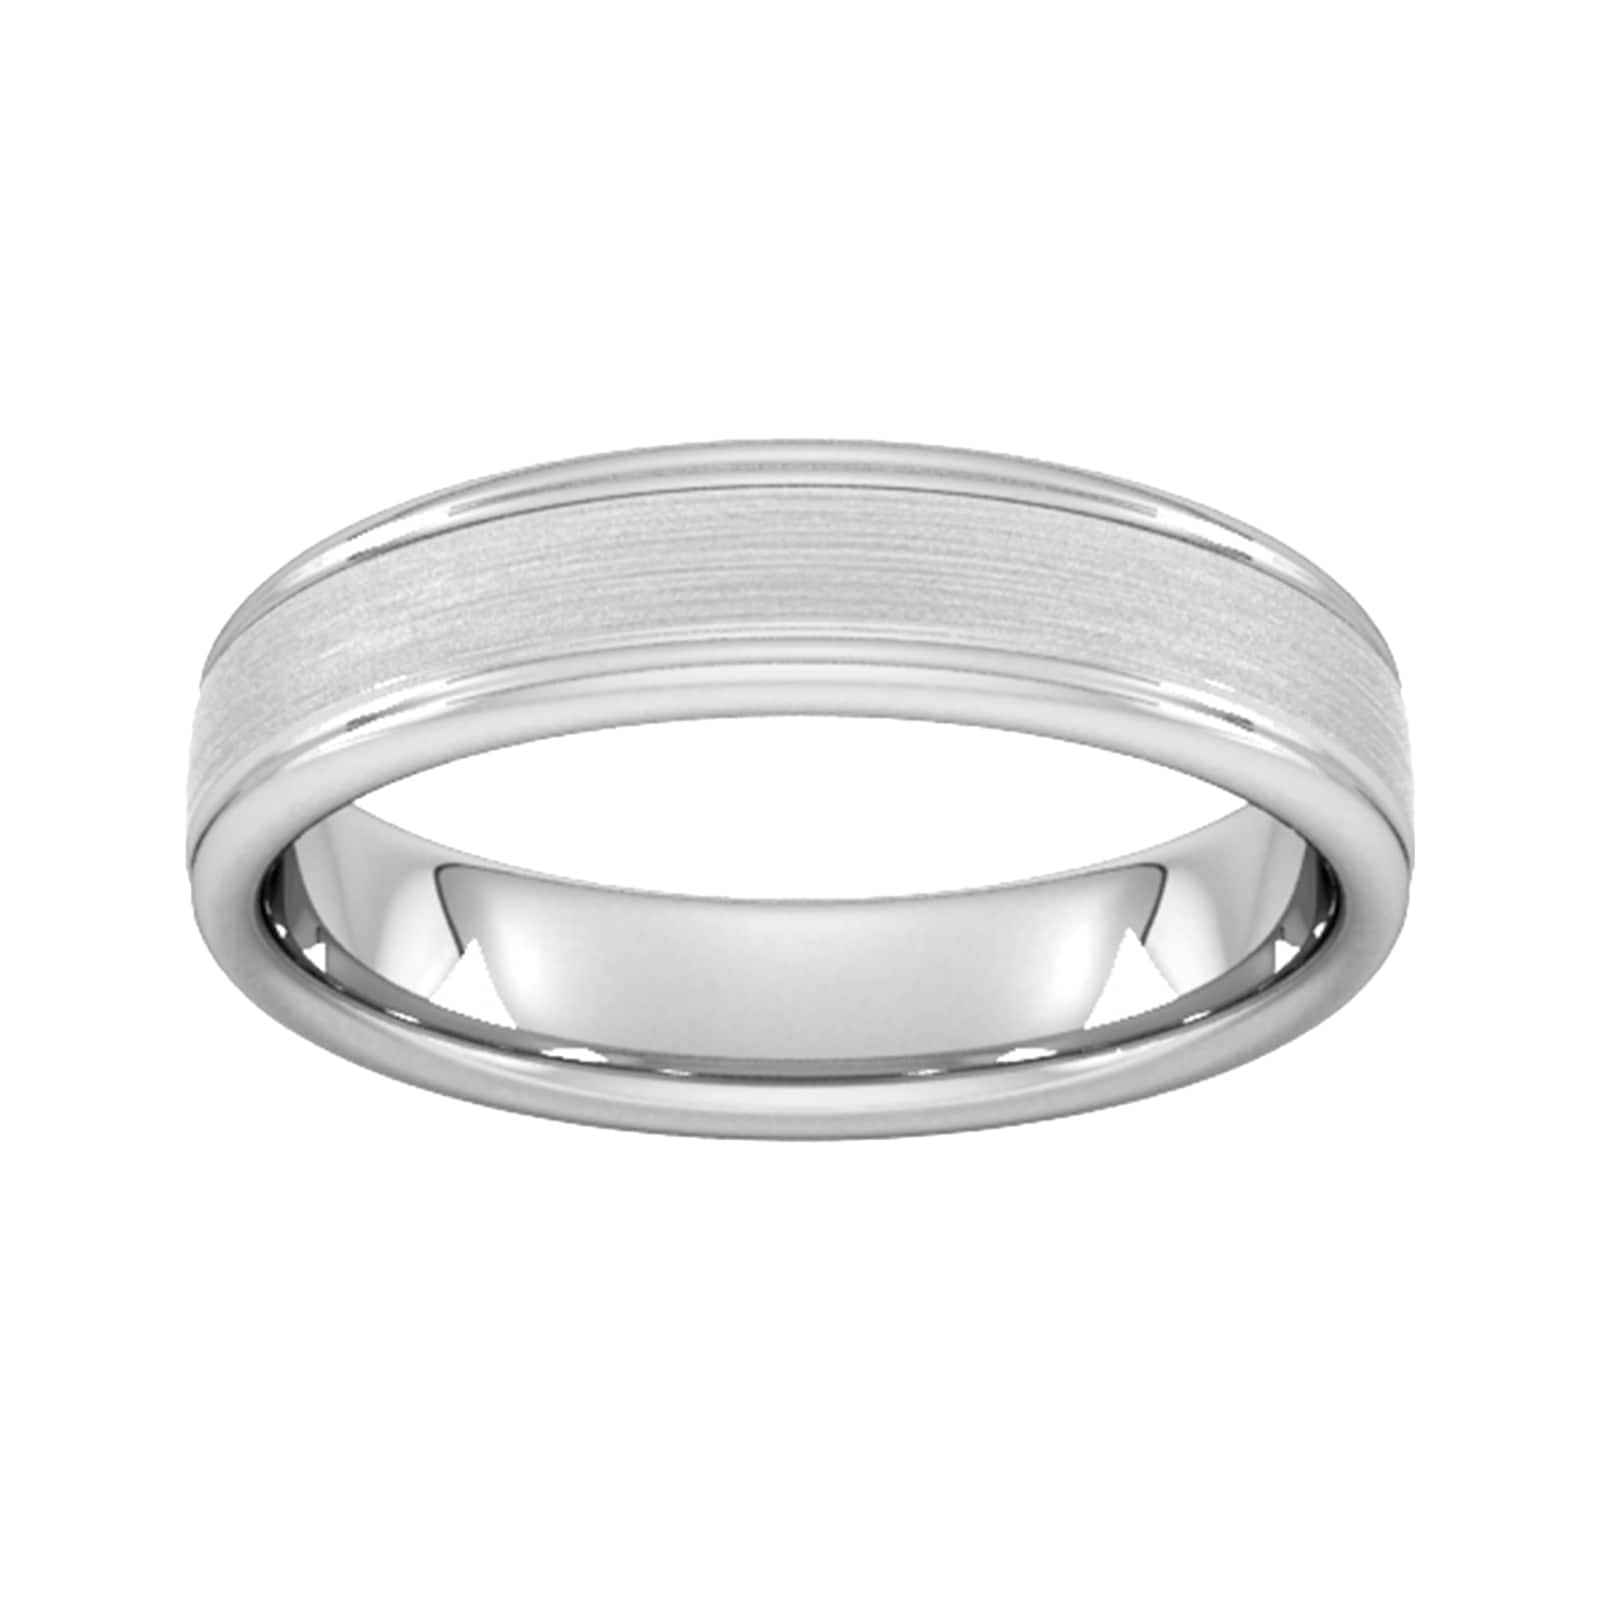 5mm Traditional Court Standard Matt Centre With Grooves Wedding Ring In 950 Palladium - Ring Size G